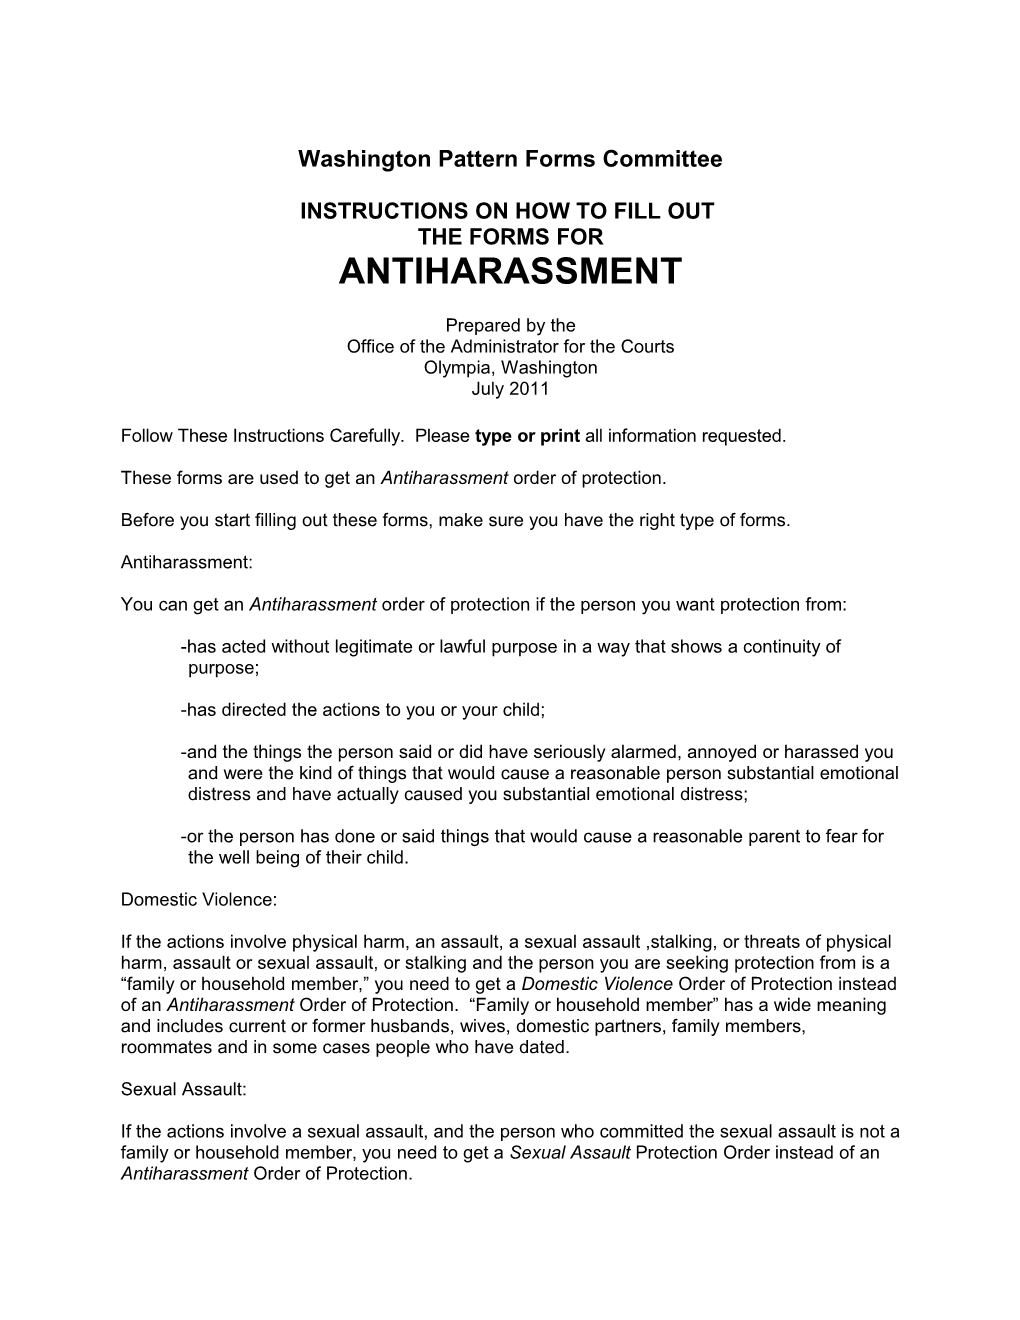 Instructions for Antiharassment Forms (07/2011)